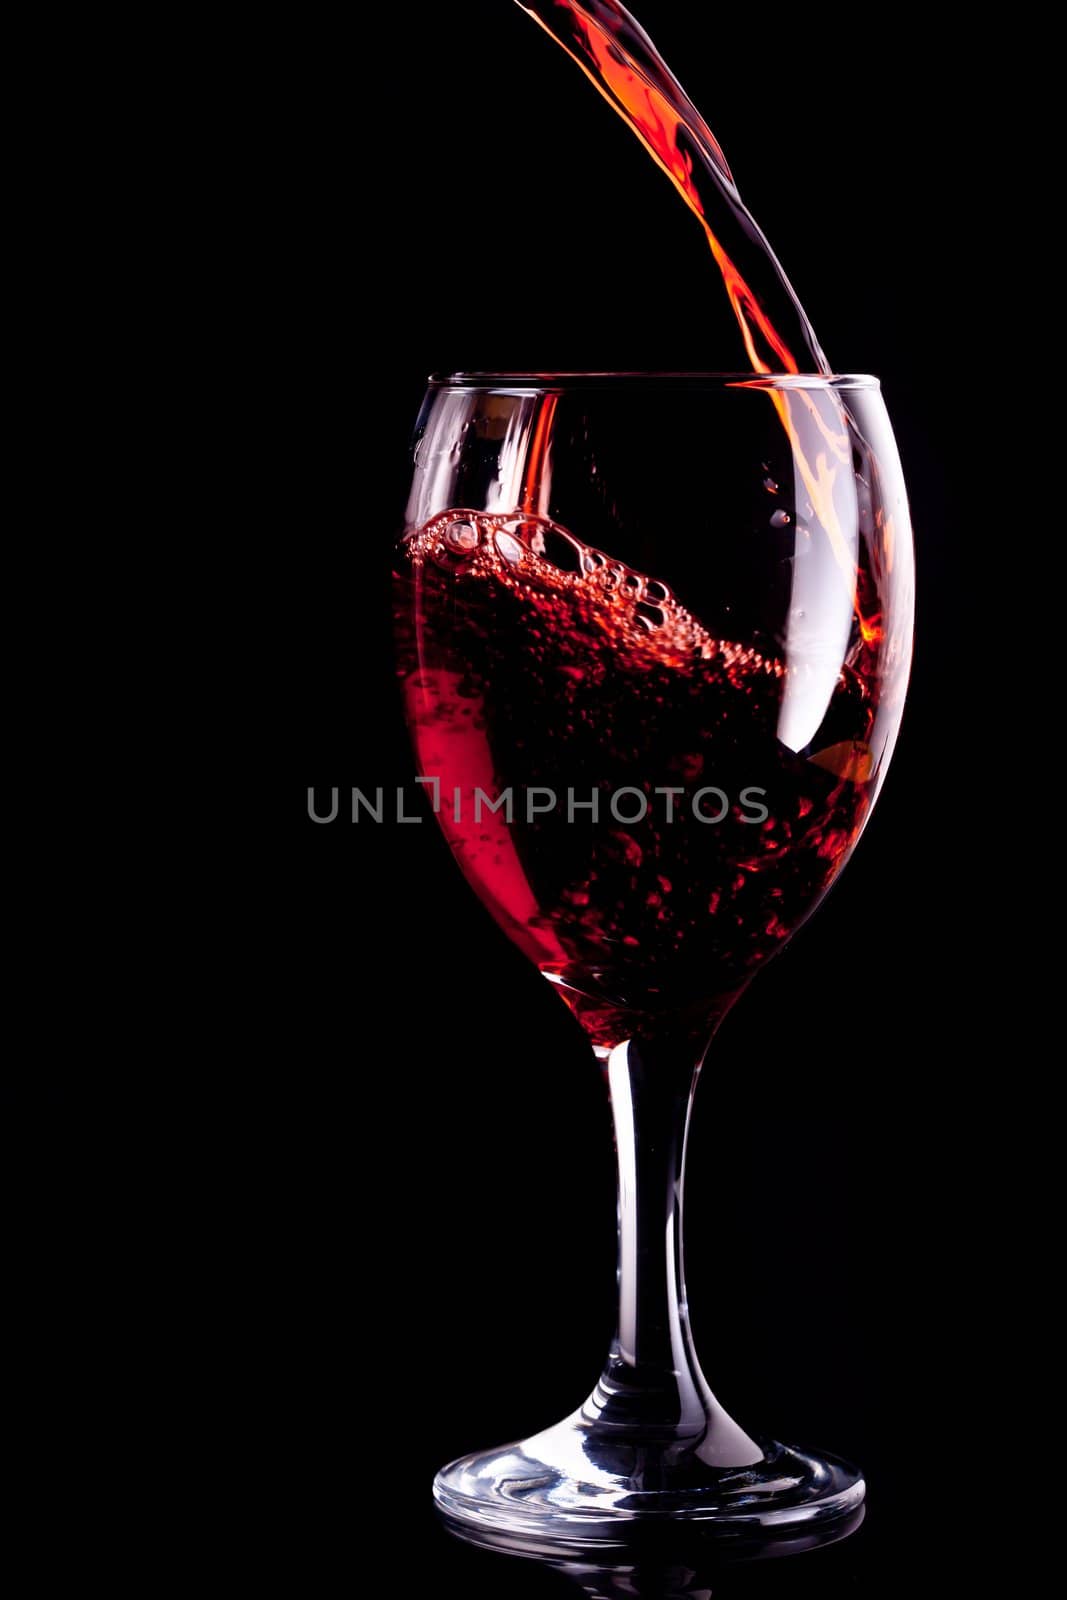 Red wine being poured into glass by Wavebreakmedia